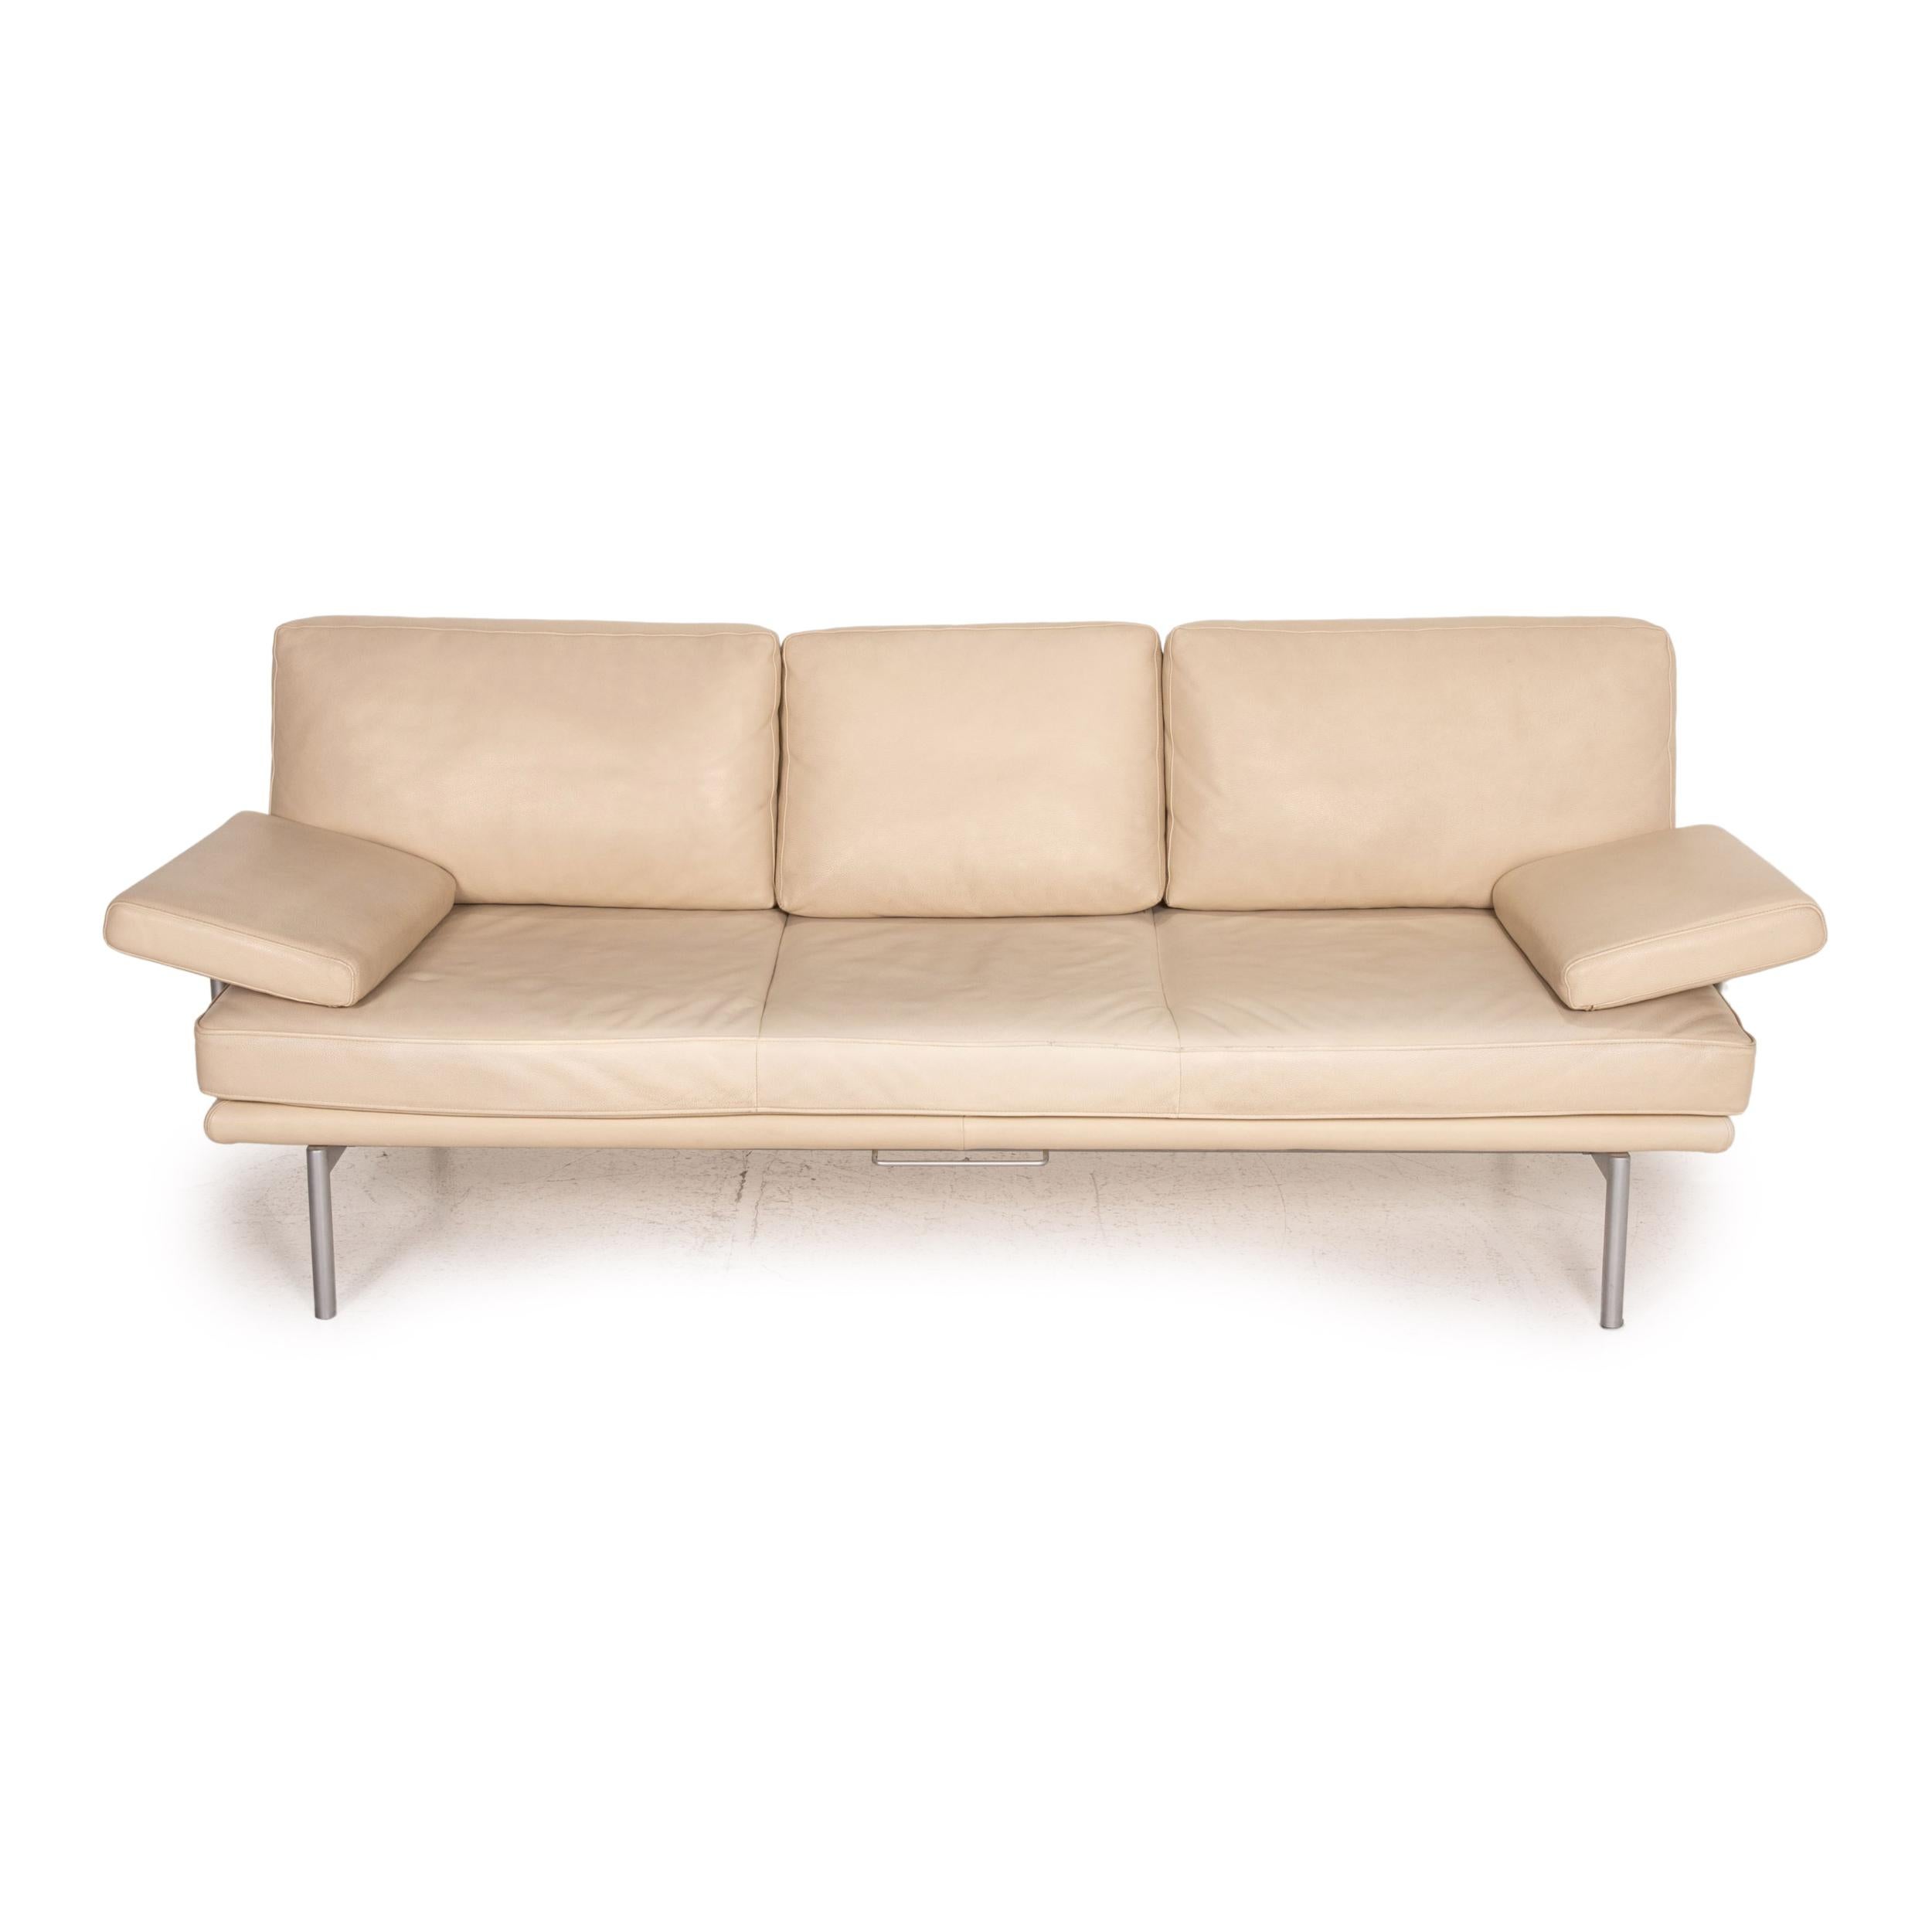 Walter Knoll Living Platform Leather Sofa Beige Three-Seater Function Coucg 1